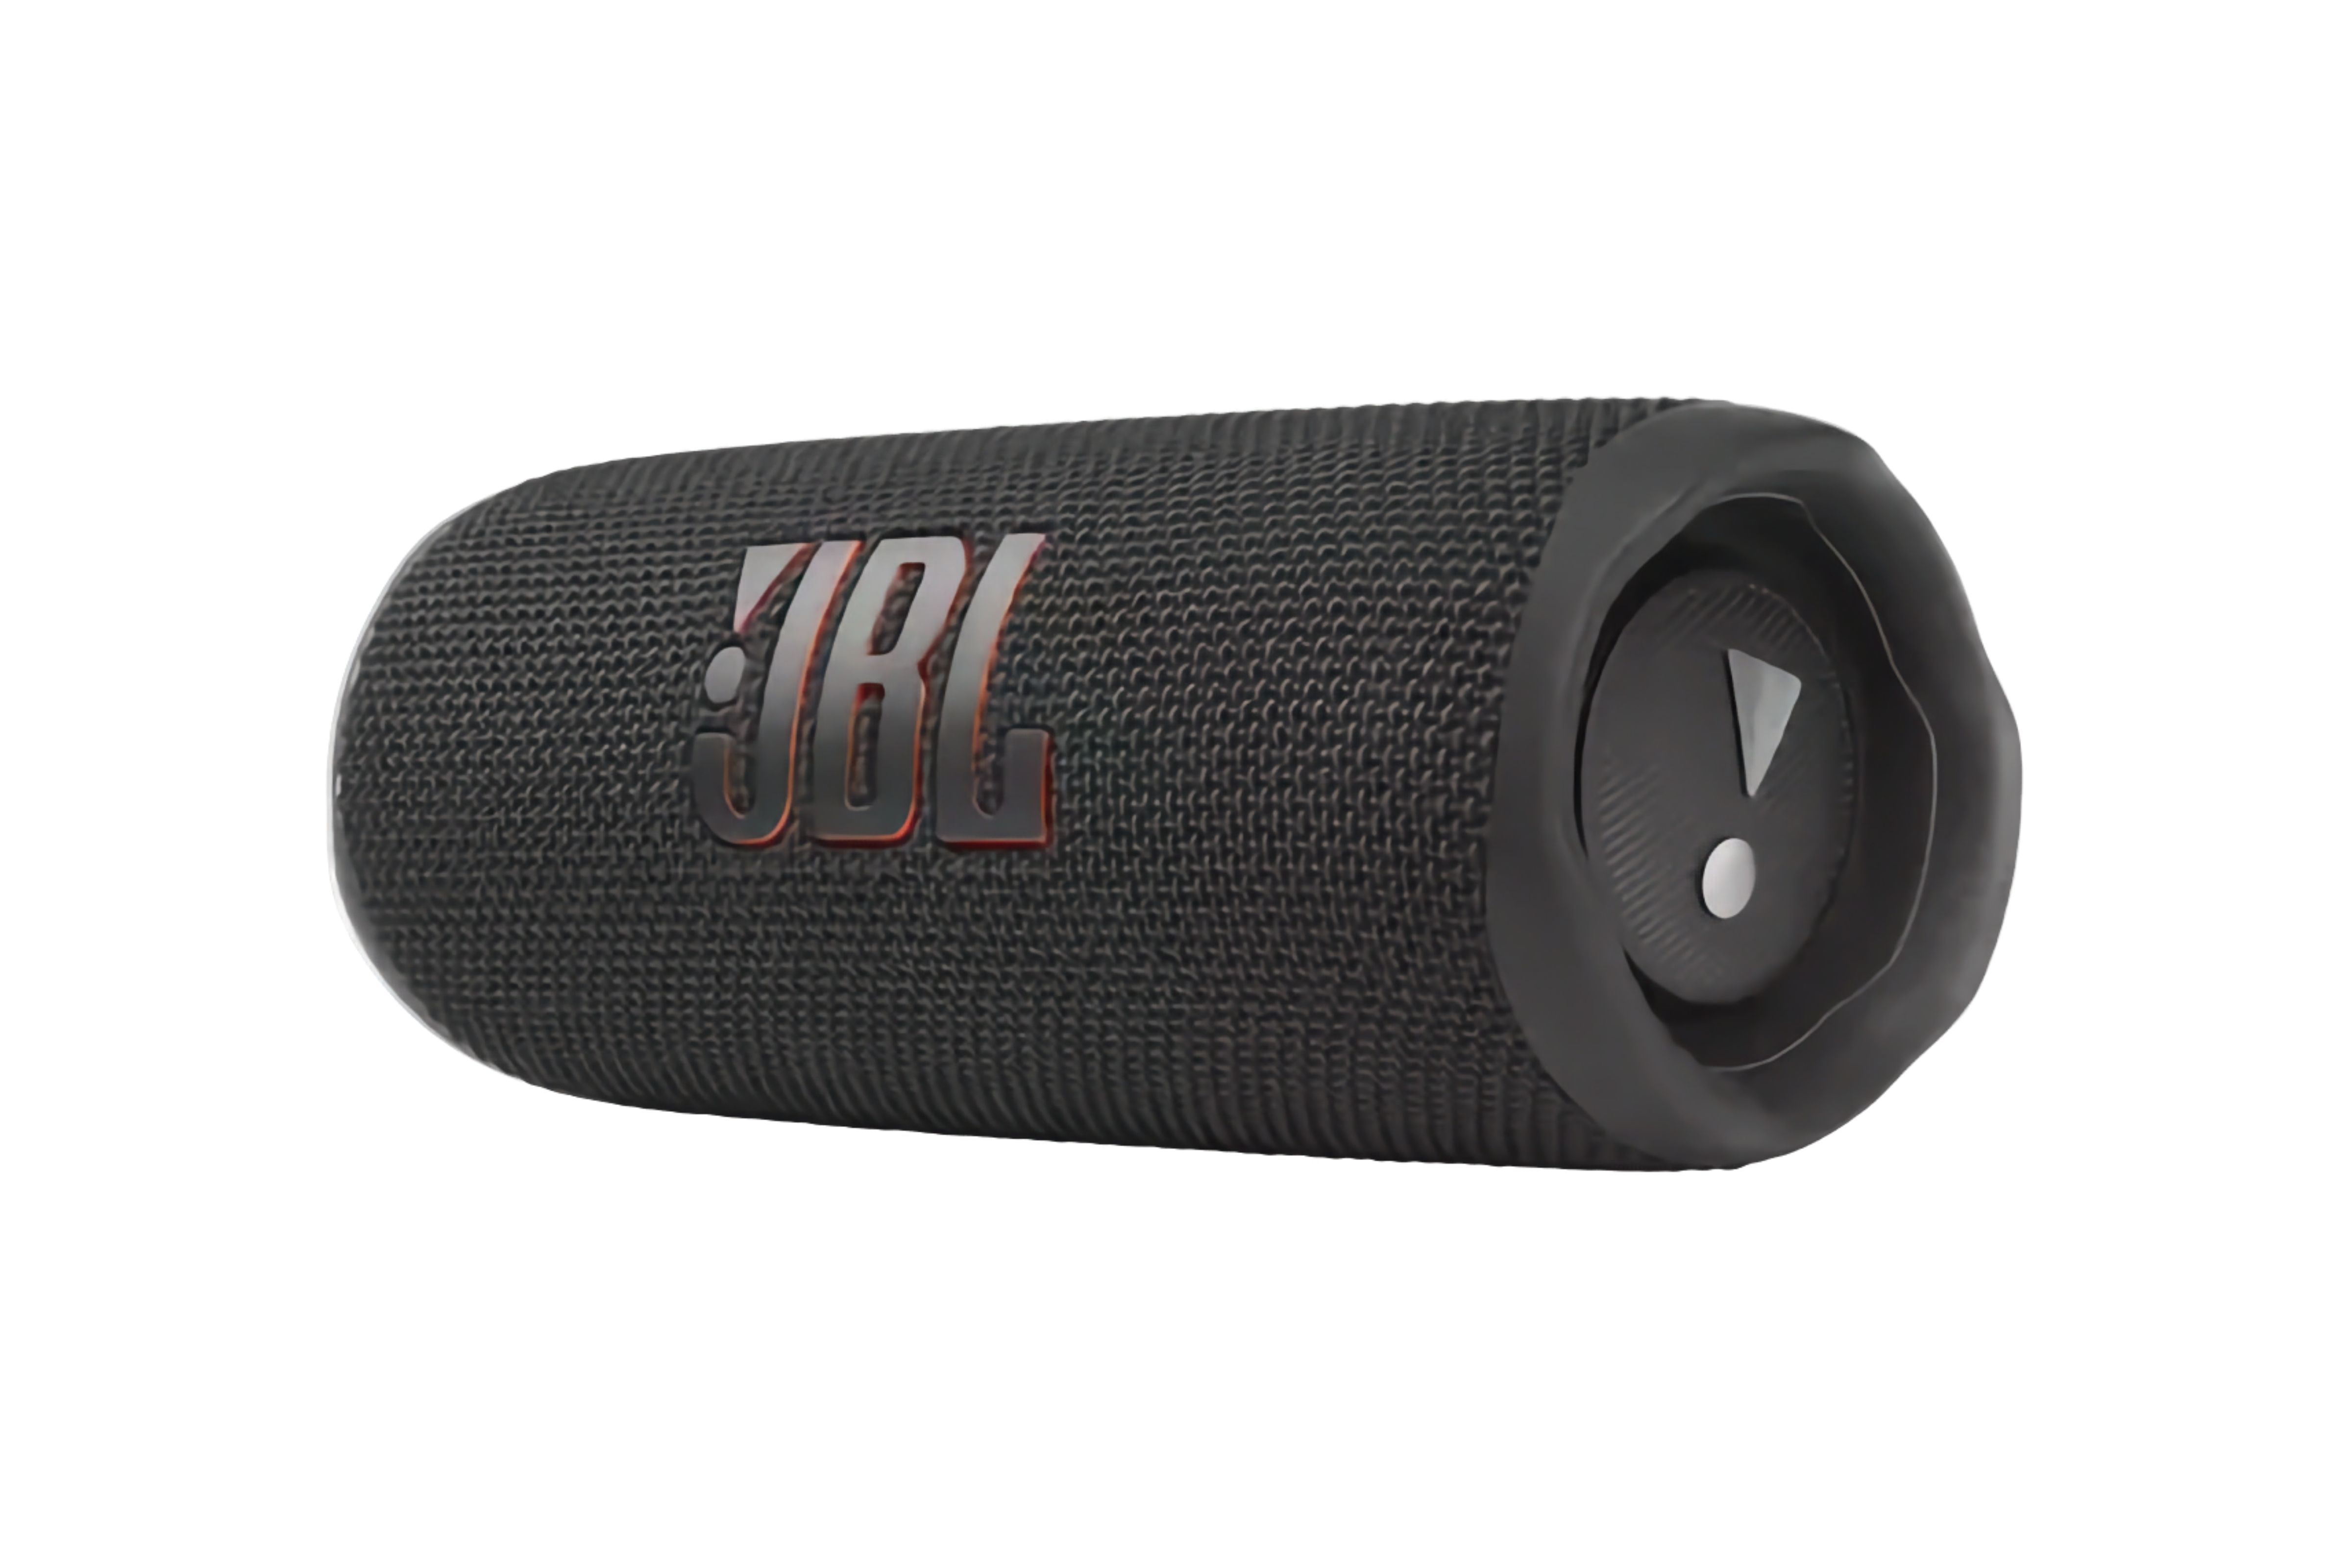 A black tube-shaped speaker with "JBL" printed on the side.